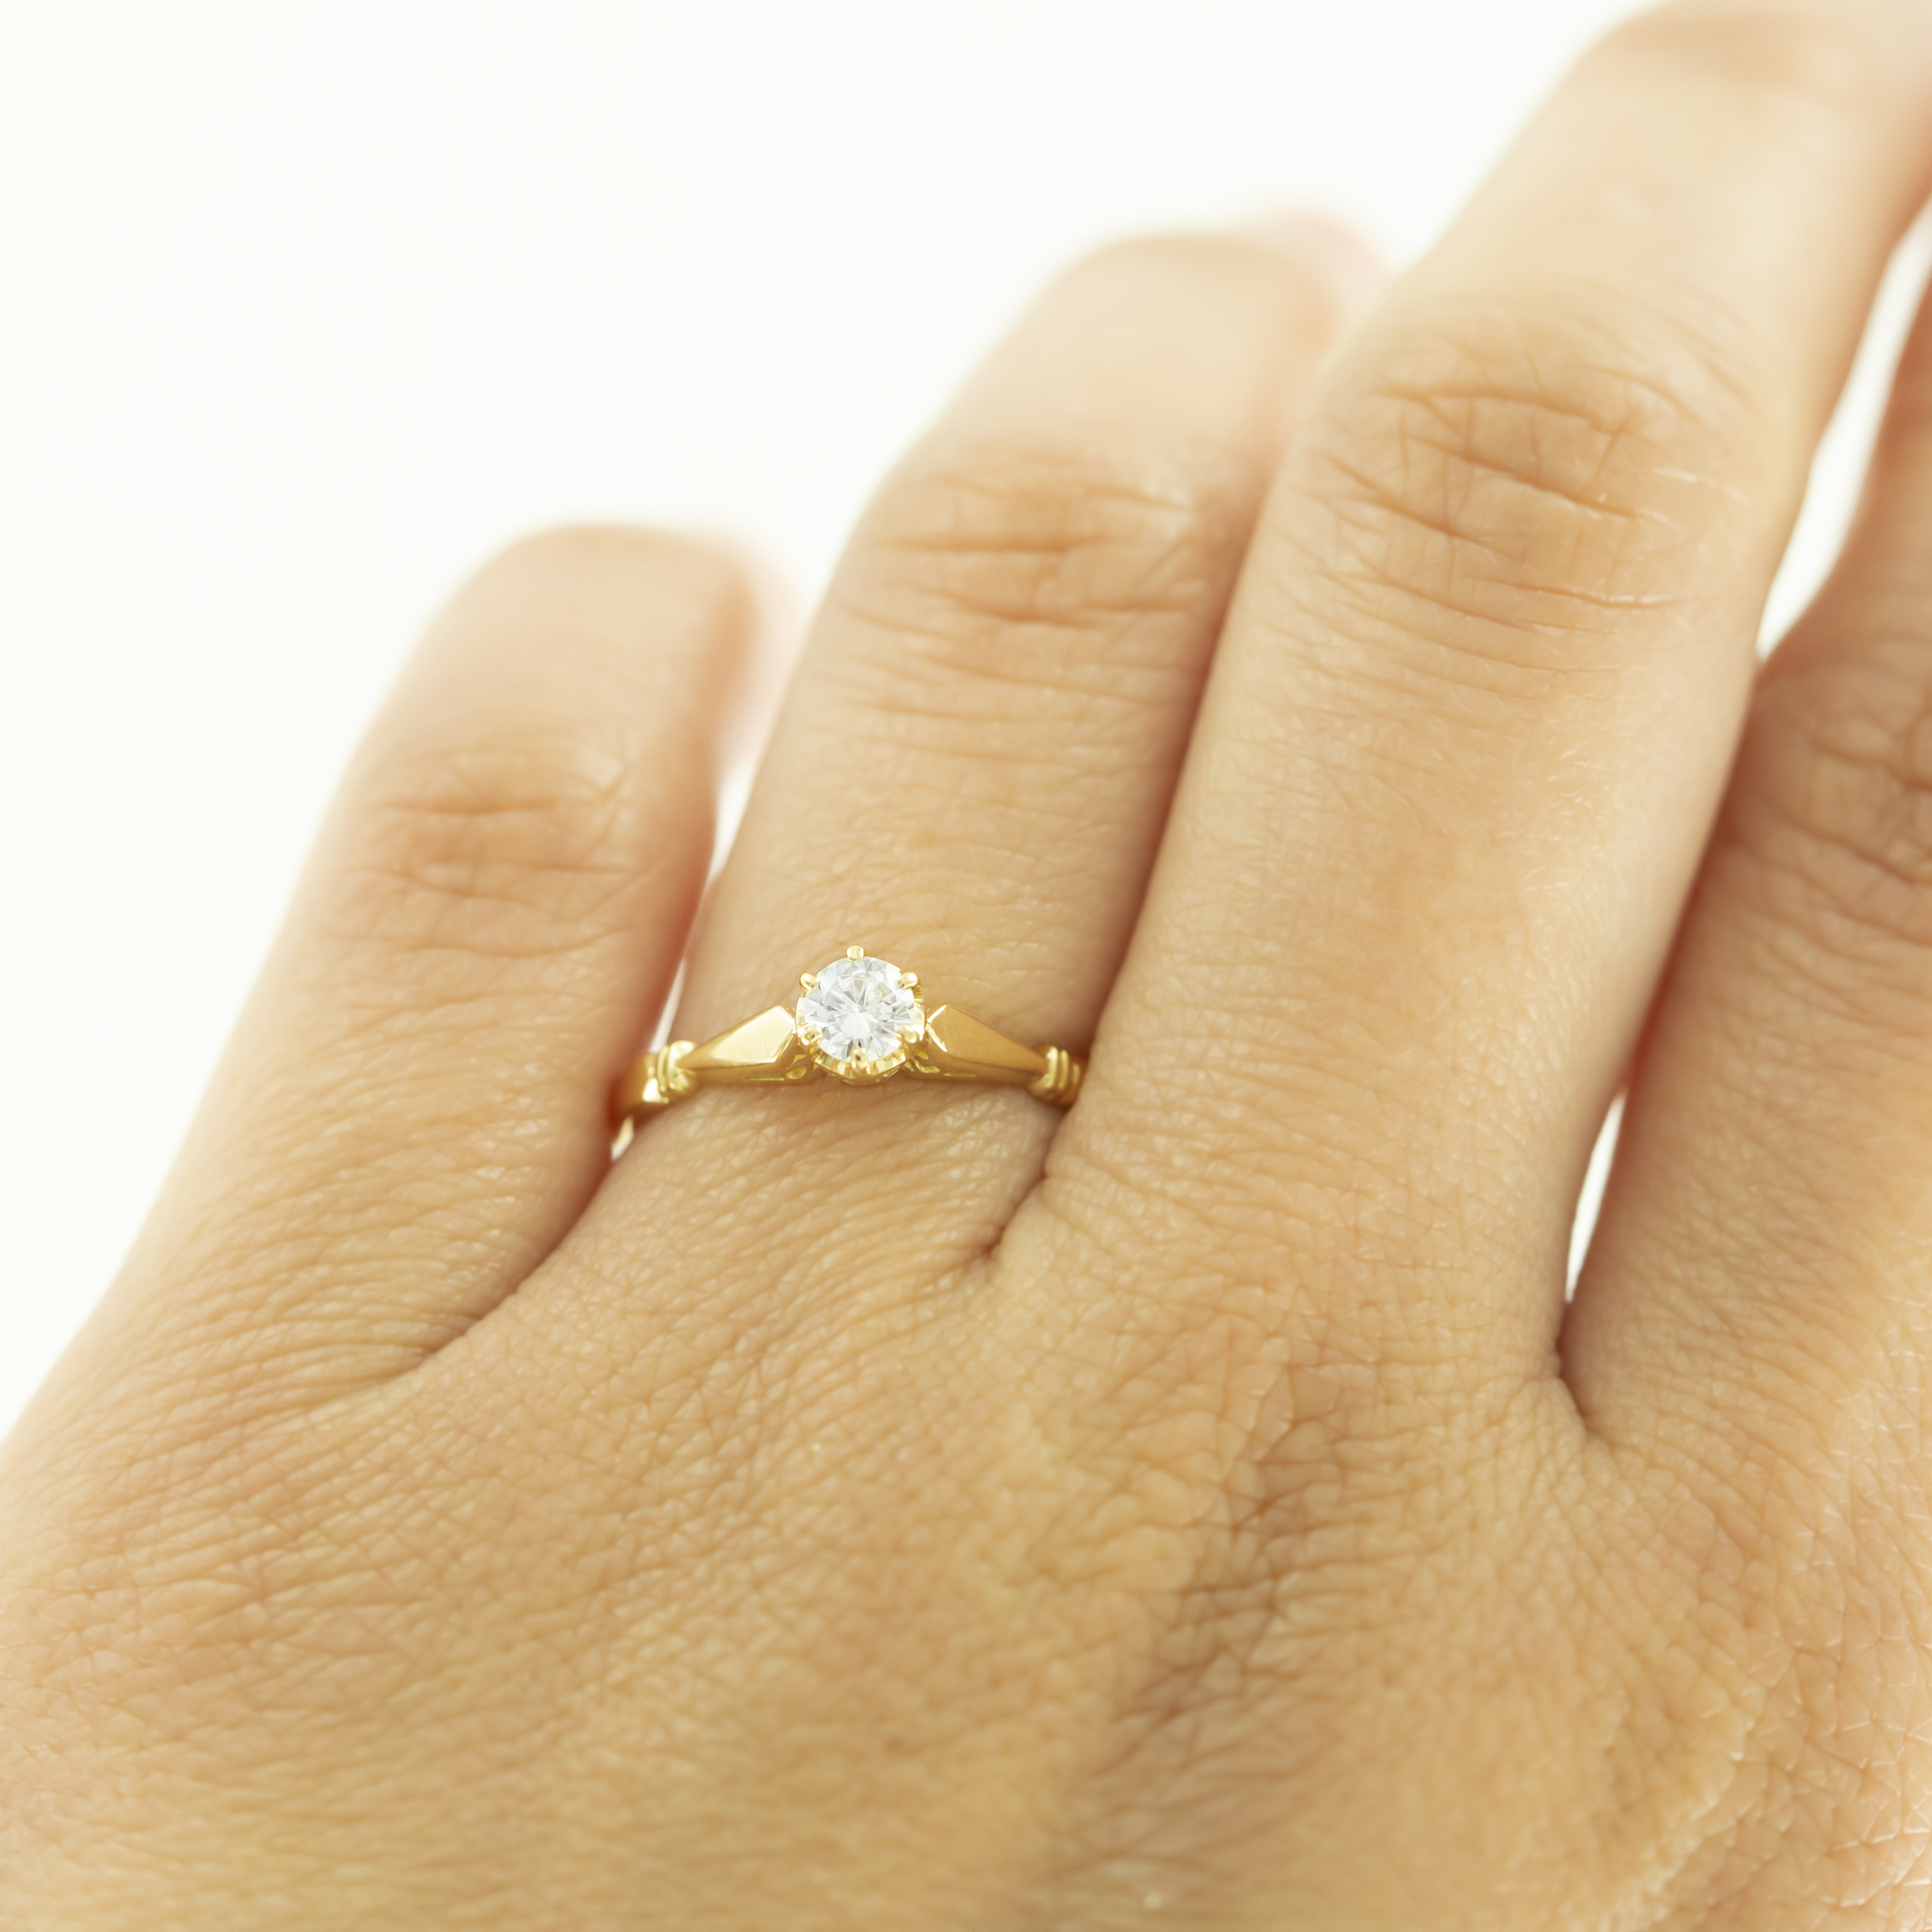 Shop All Engagement Ring Styles | Kay | Kay